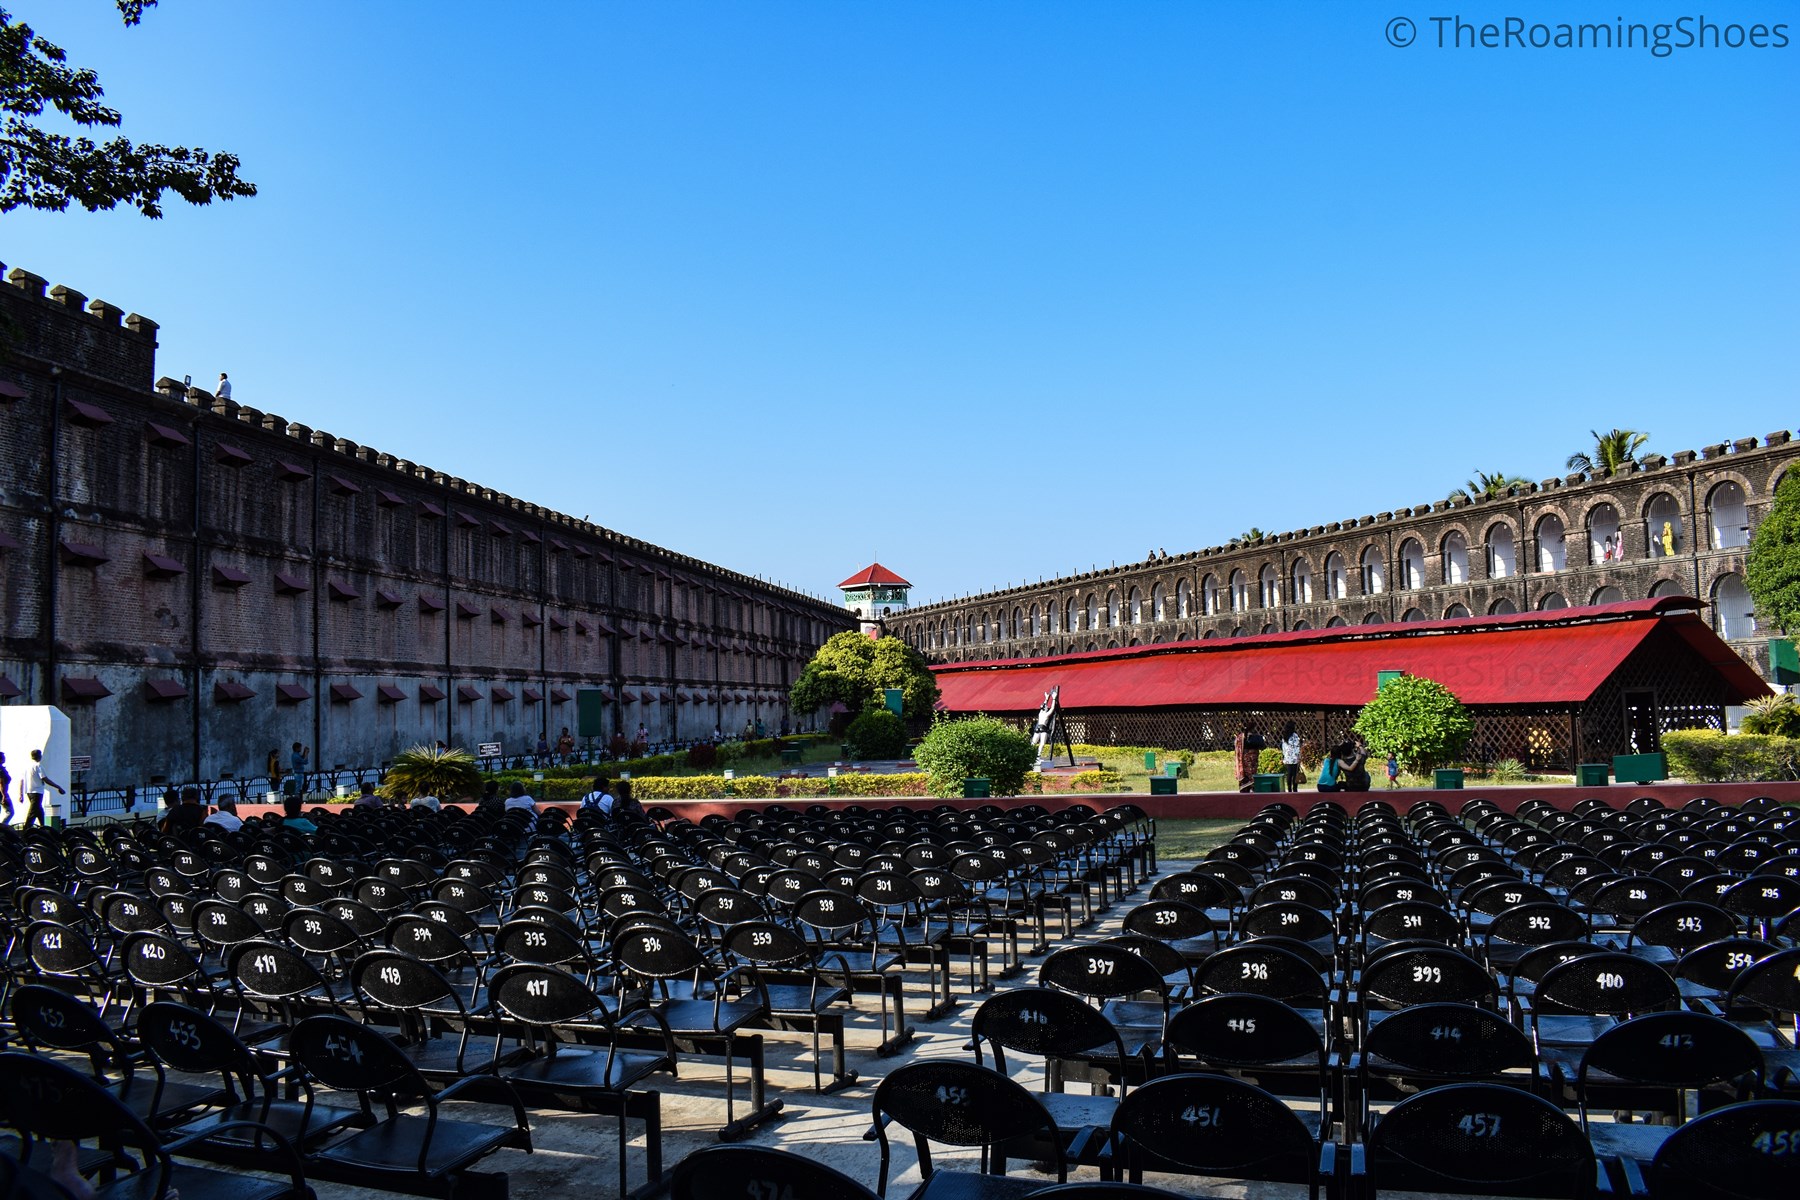 Sitting arrangement for light and sound show in cellular jail